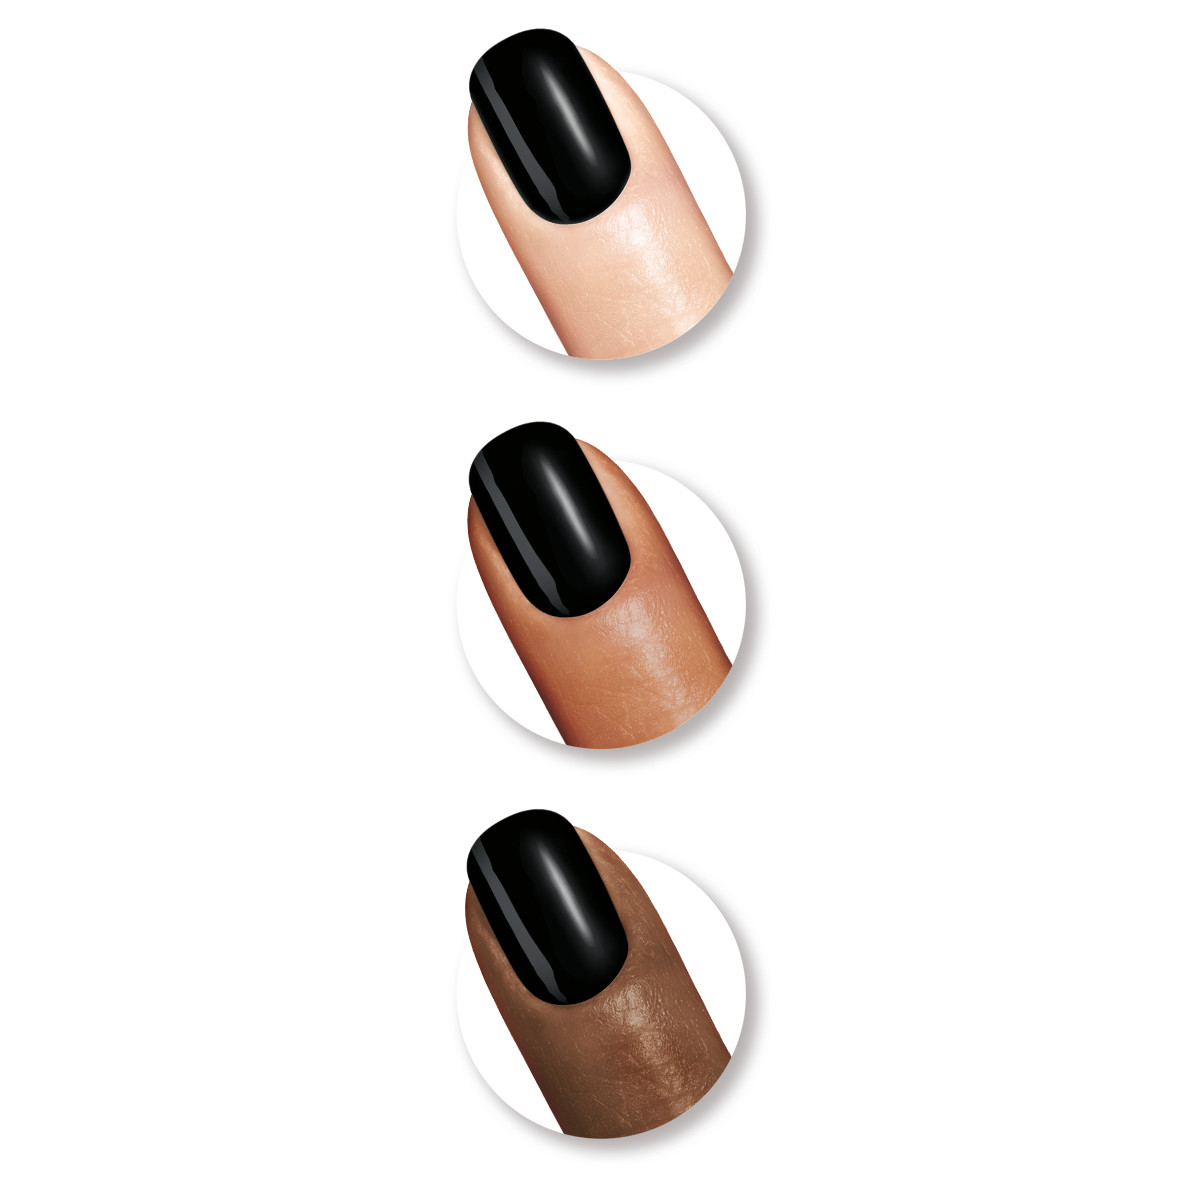 Sally Hansen Complete Salon Manicure Nail Color, Hooked on Onyx - image 2 of 2